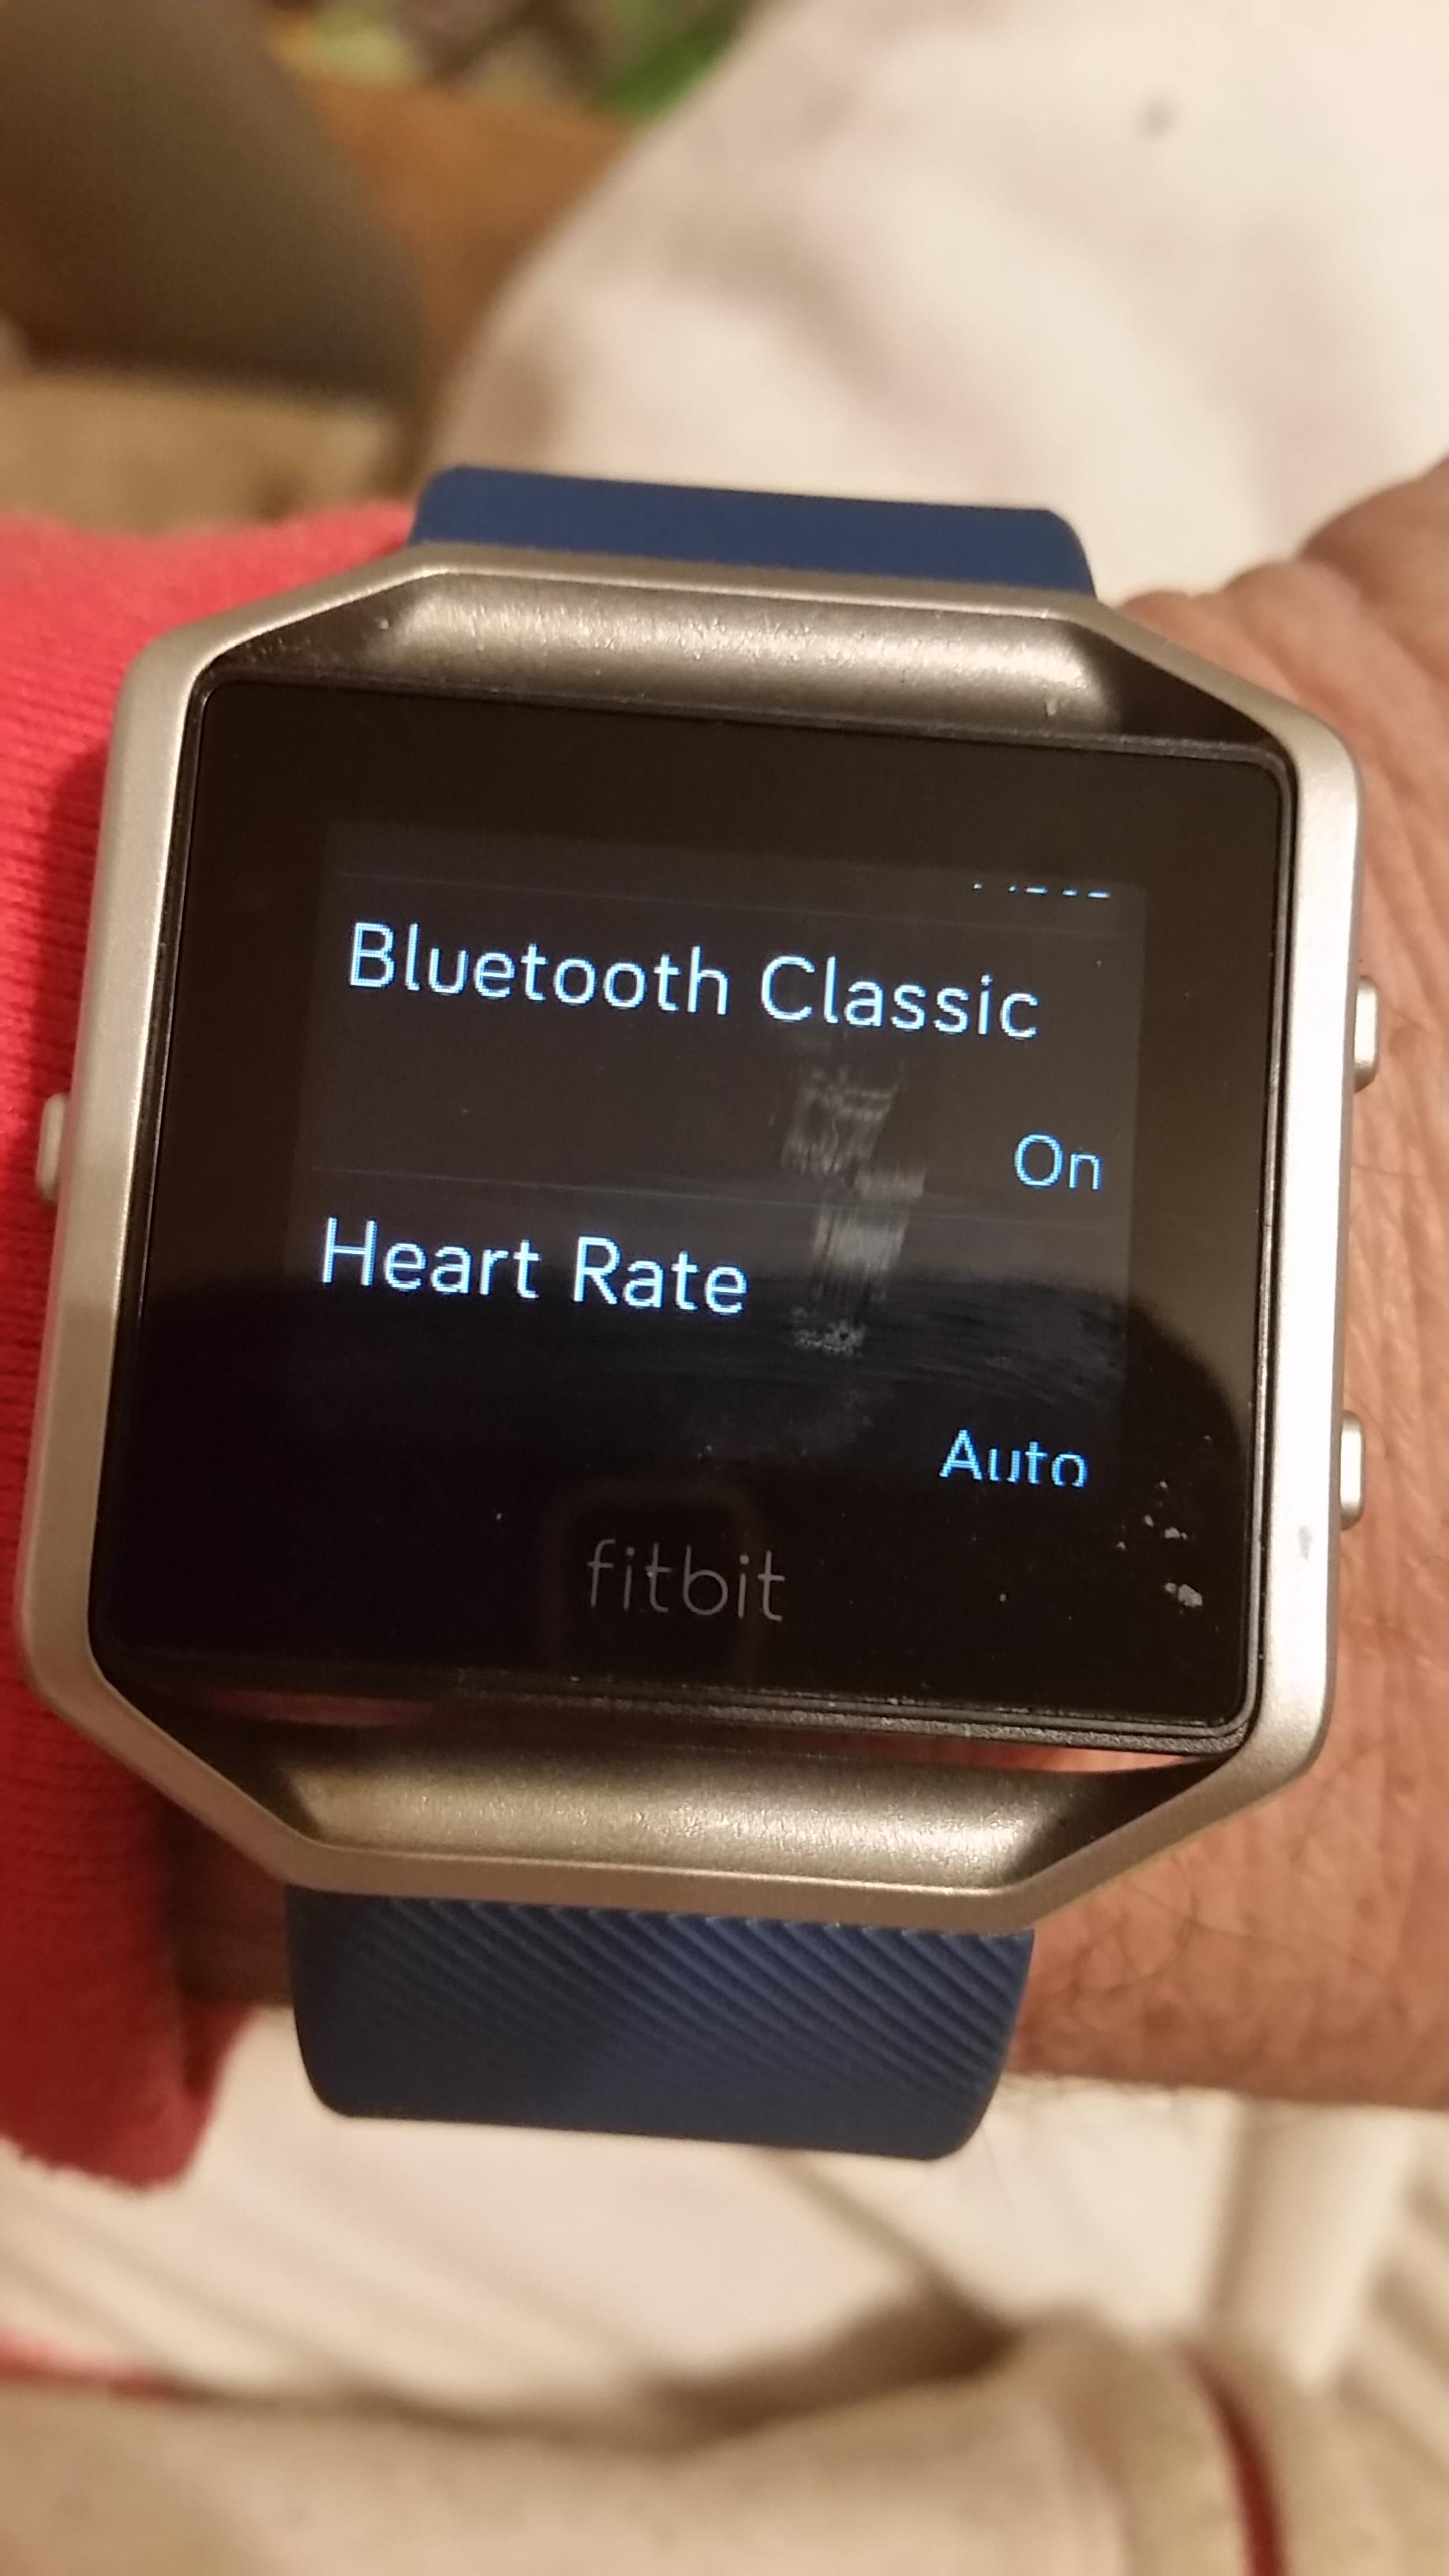 No Bluetooth option listed in the settings of my B - Fitbit 